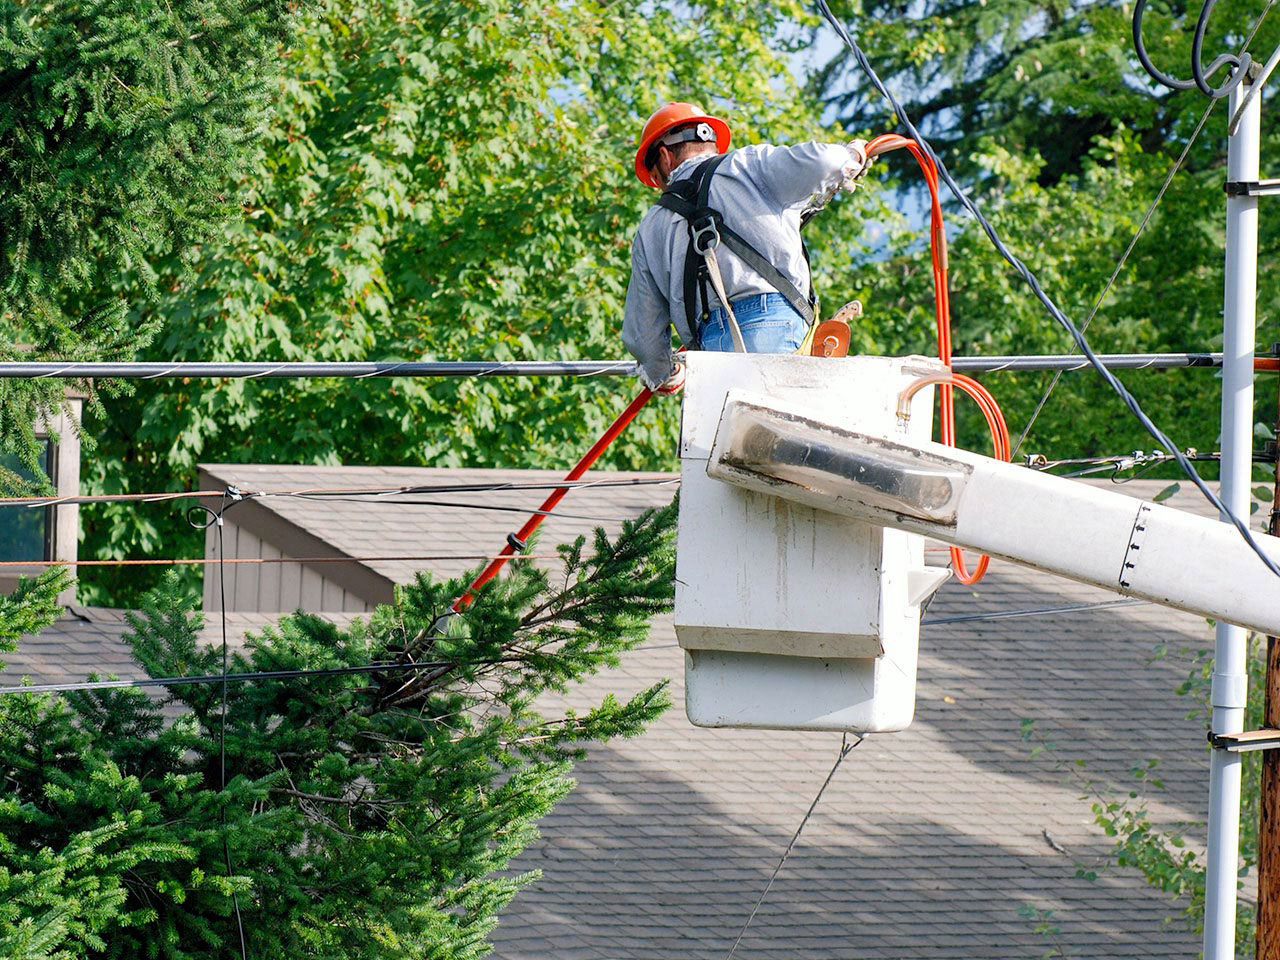 Oncor works with line-qualified tree pruning contractors who help prevent outages through proper tree maintenance.